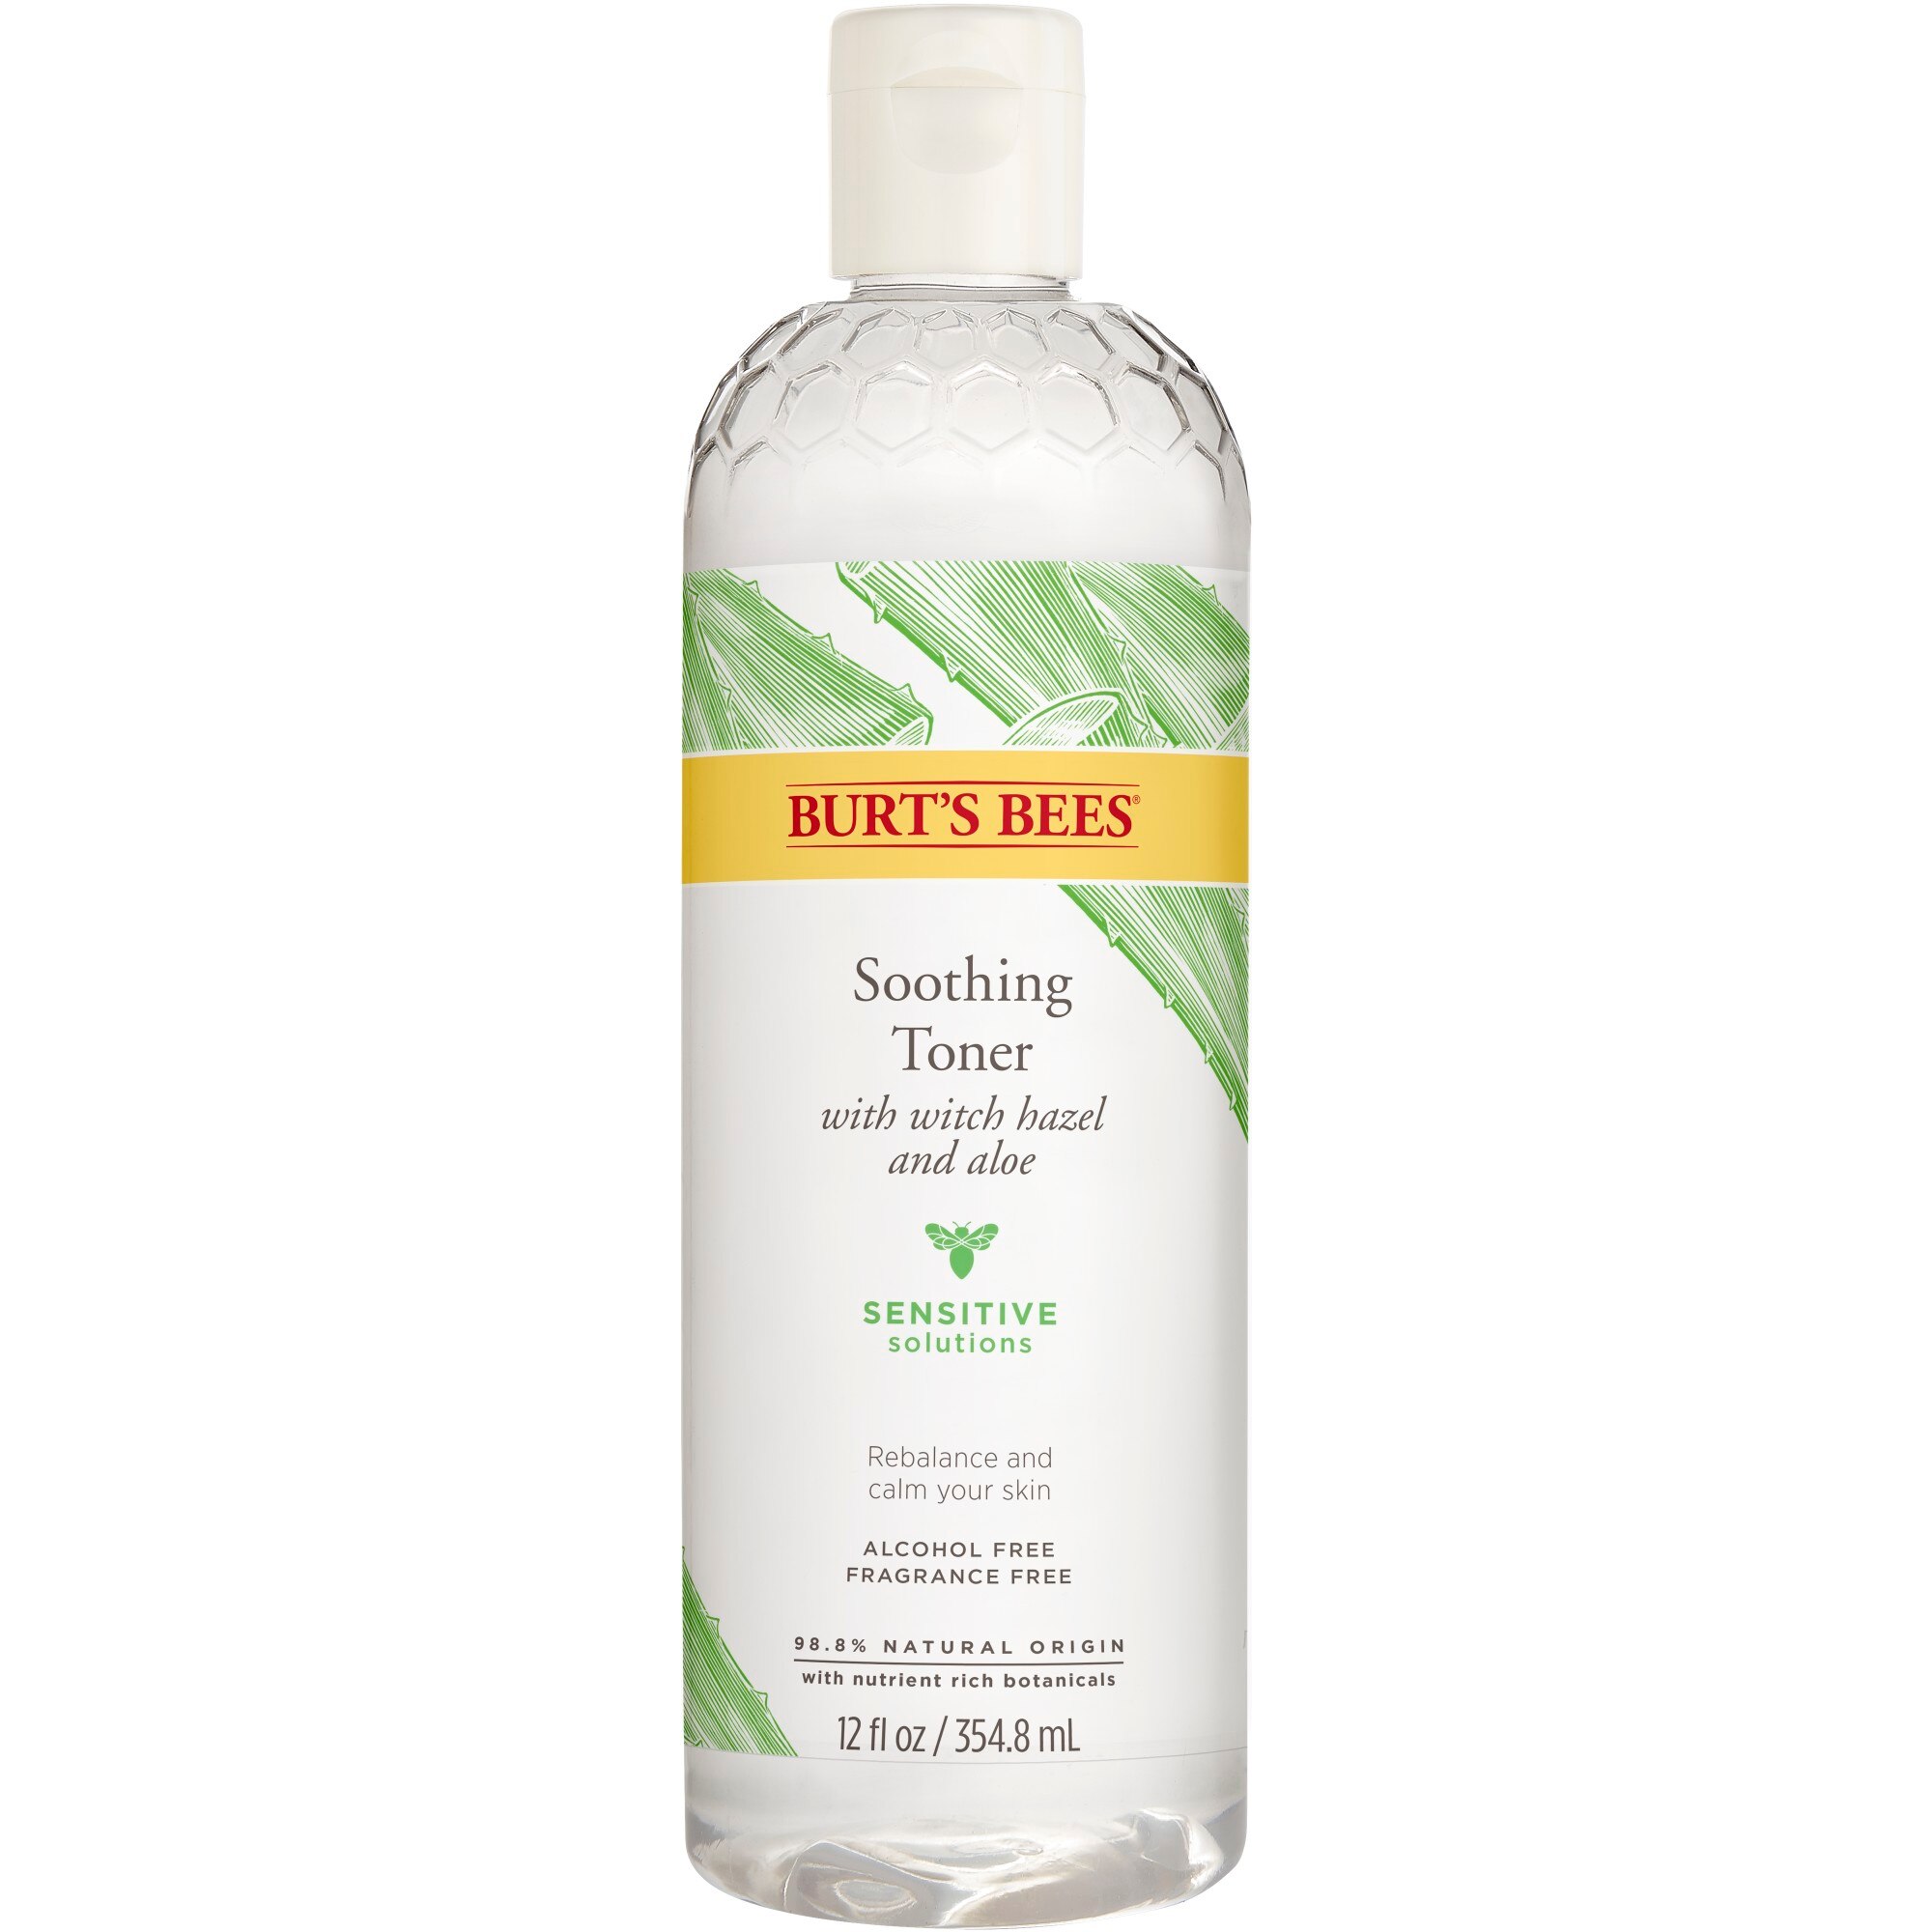 Burt's Bees Sensitive Solutions Soothing Toner with Witch Hazel and Aloe, 12 OZ